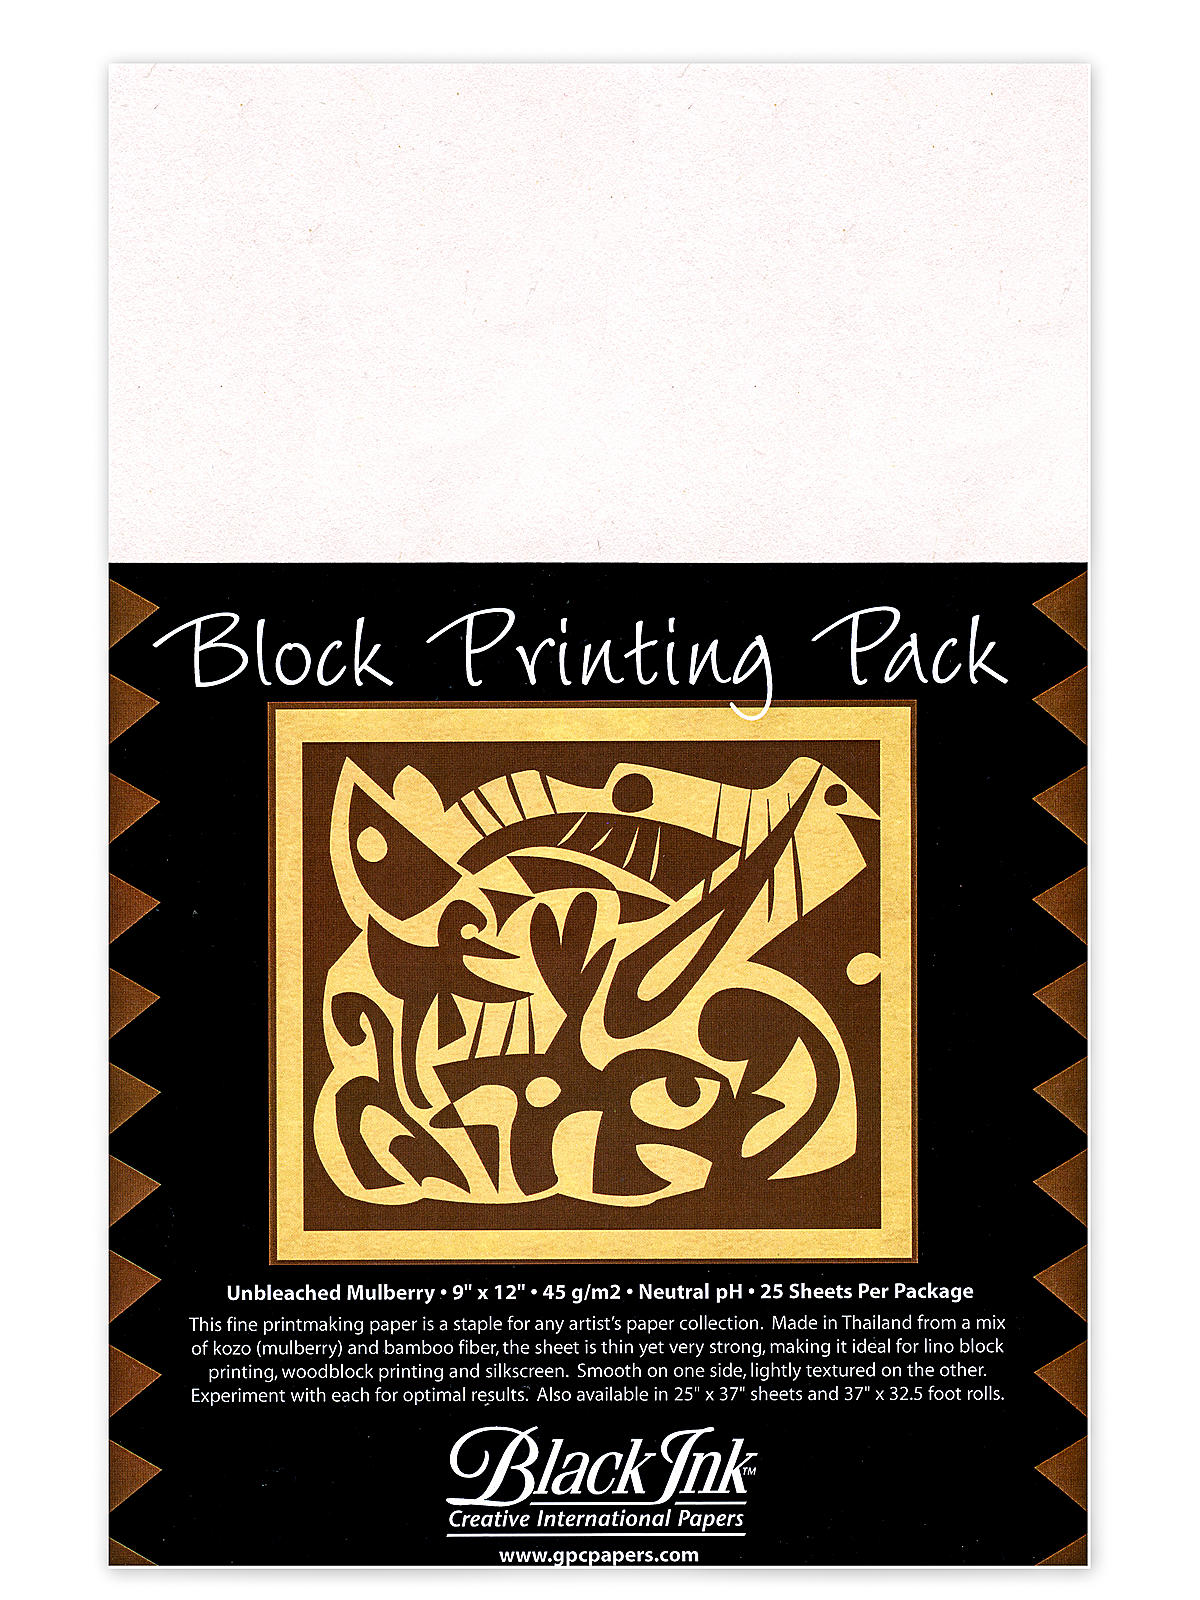 Thai Mulberry Block Printing Paper Packs Unbleached 9 In. X 12 In. 25 Sheets